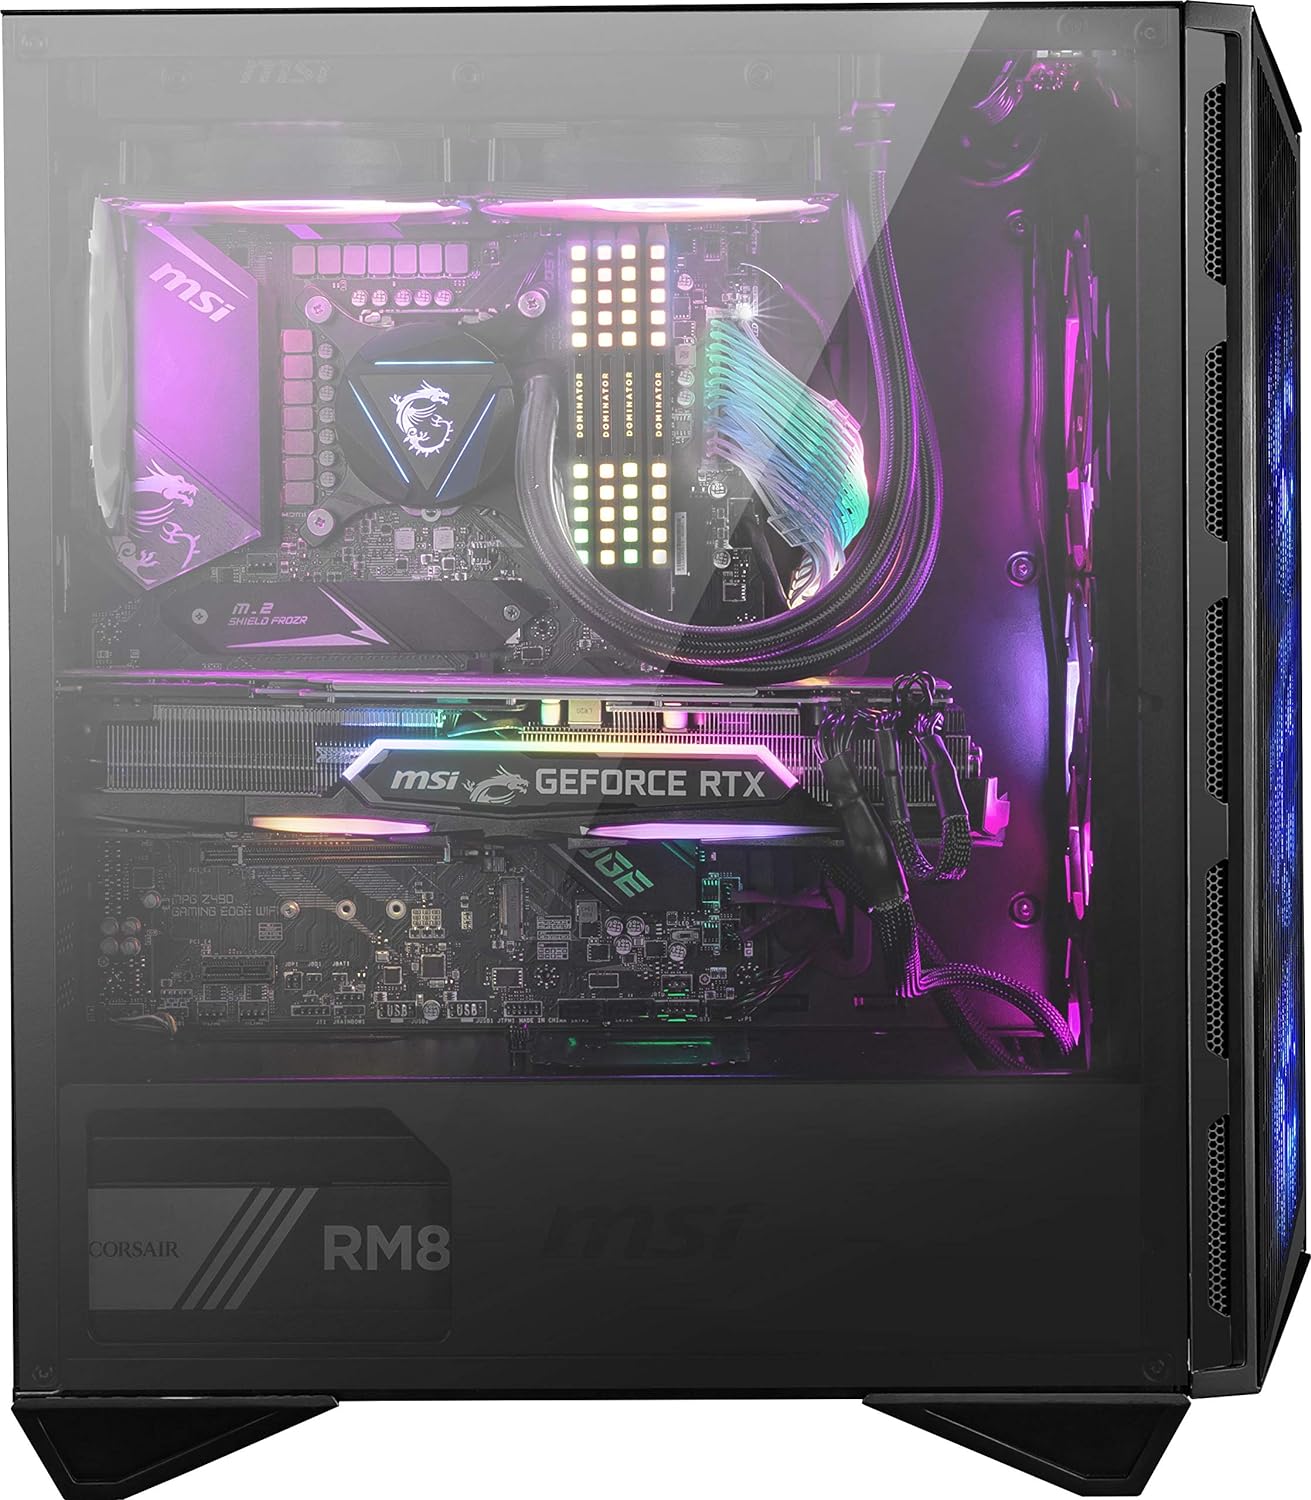 MSI MPG GUNGNIR 110R - Premium Mid-Tower Gaming PC Case - Tempered Glass Side Panel - 4 x ARGB 120mm Fans - Liquid Cooling Support up to 360mm Radiator - Two-Tone Design